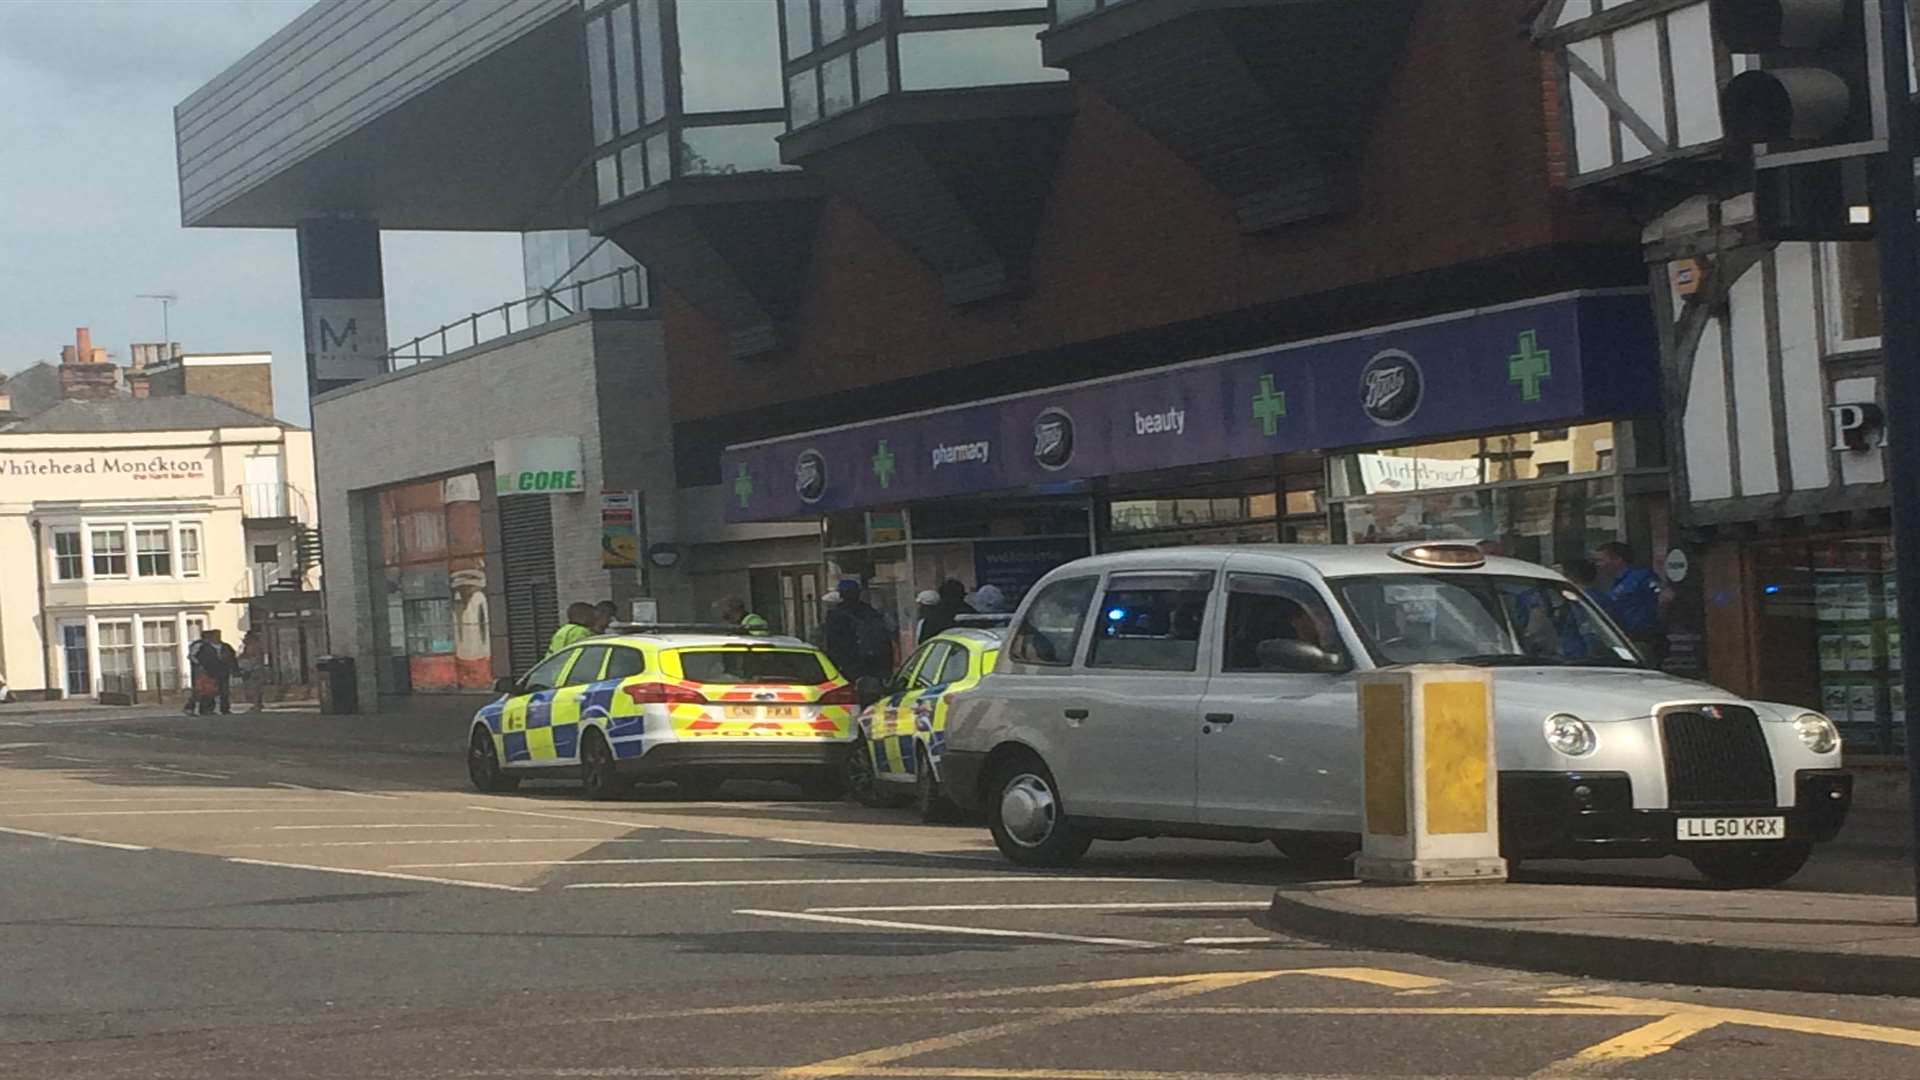 Two police cars were seen parked outside Boots in King Street, Maidstone